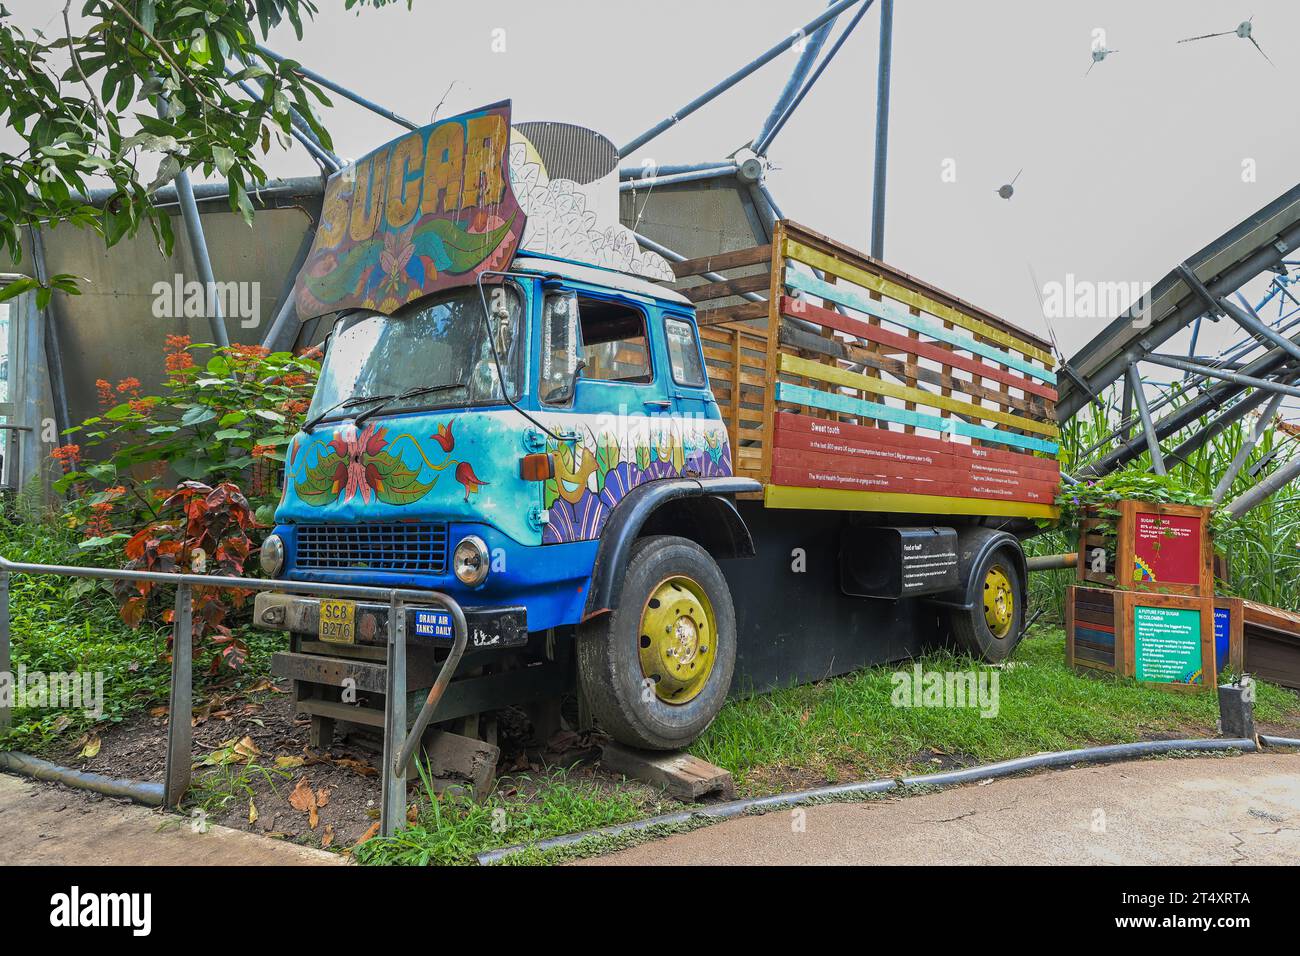 A sugar lorry or truck inside the Rainforest Biome at the Eden Project, a visitor attraction near St Austell, Cornwall, England, United Kingdom UK Stock Photo